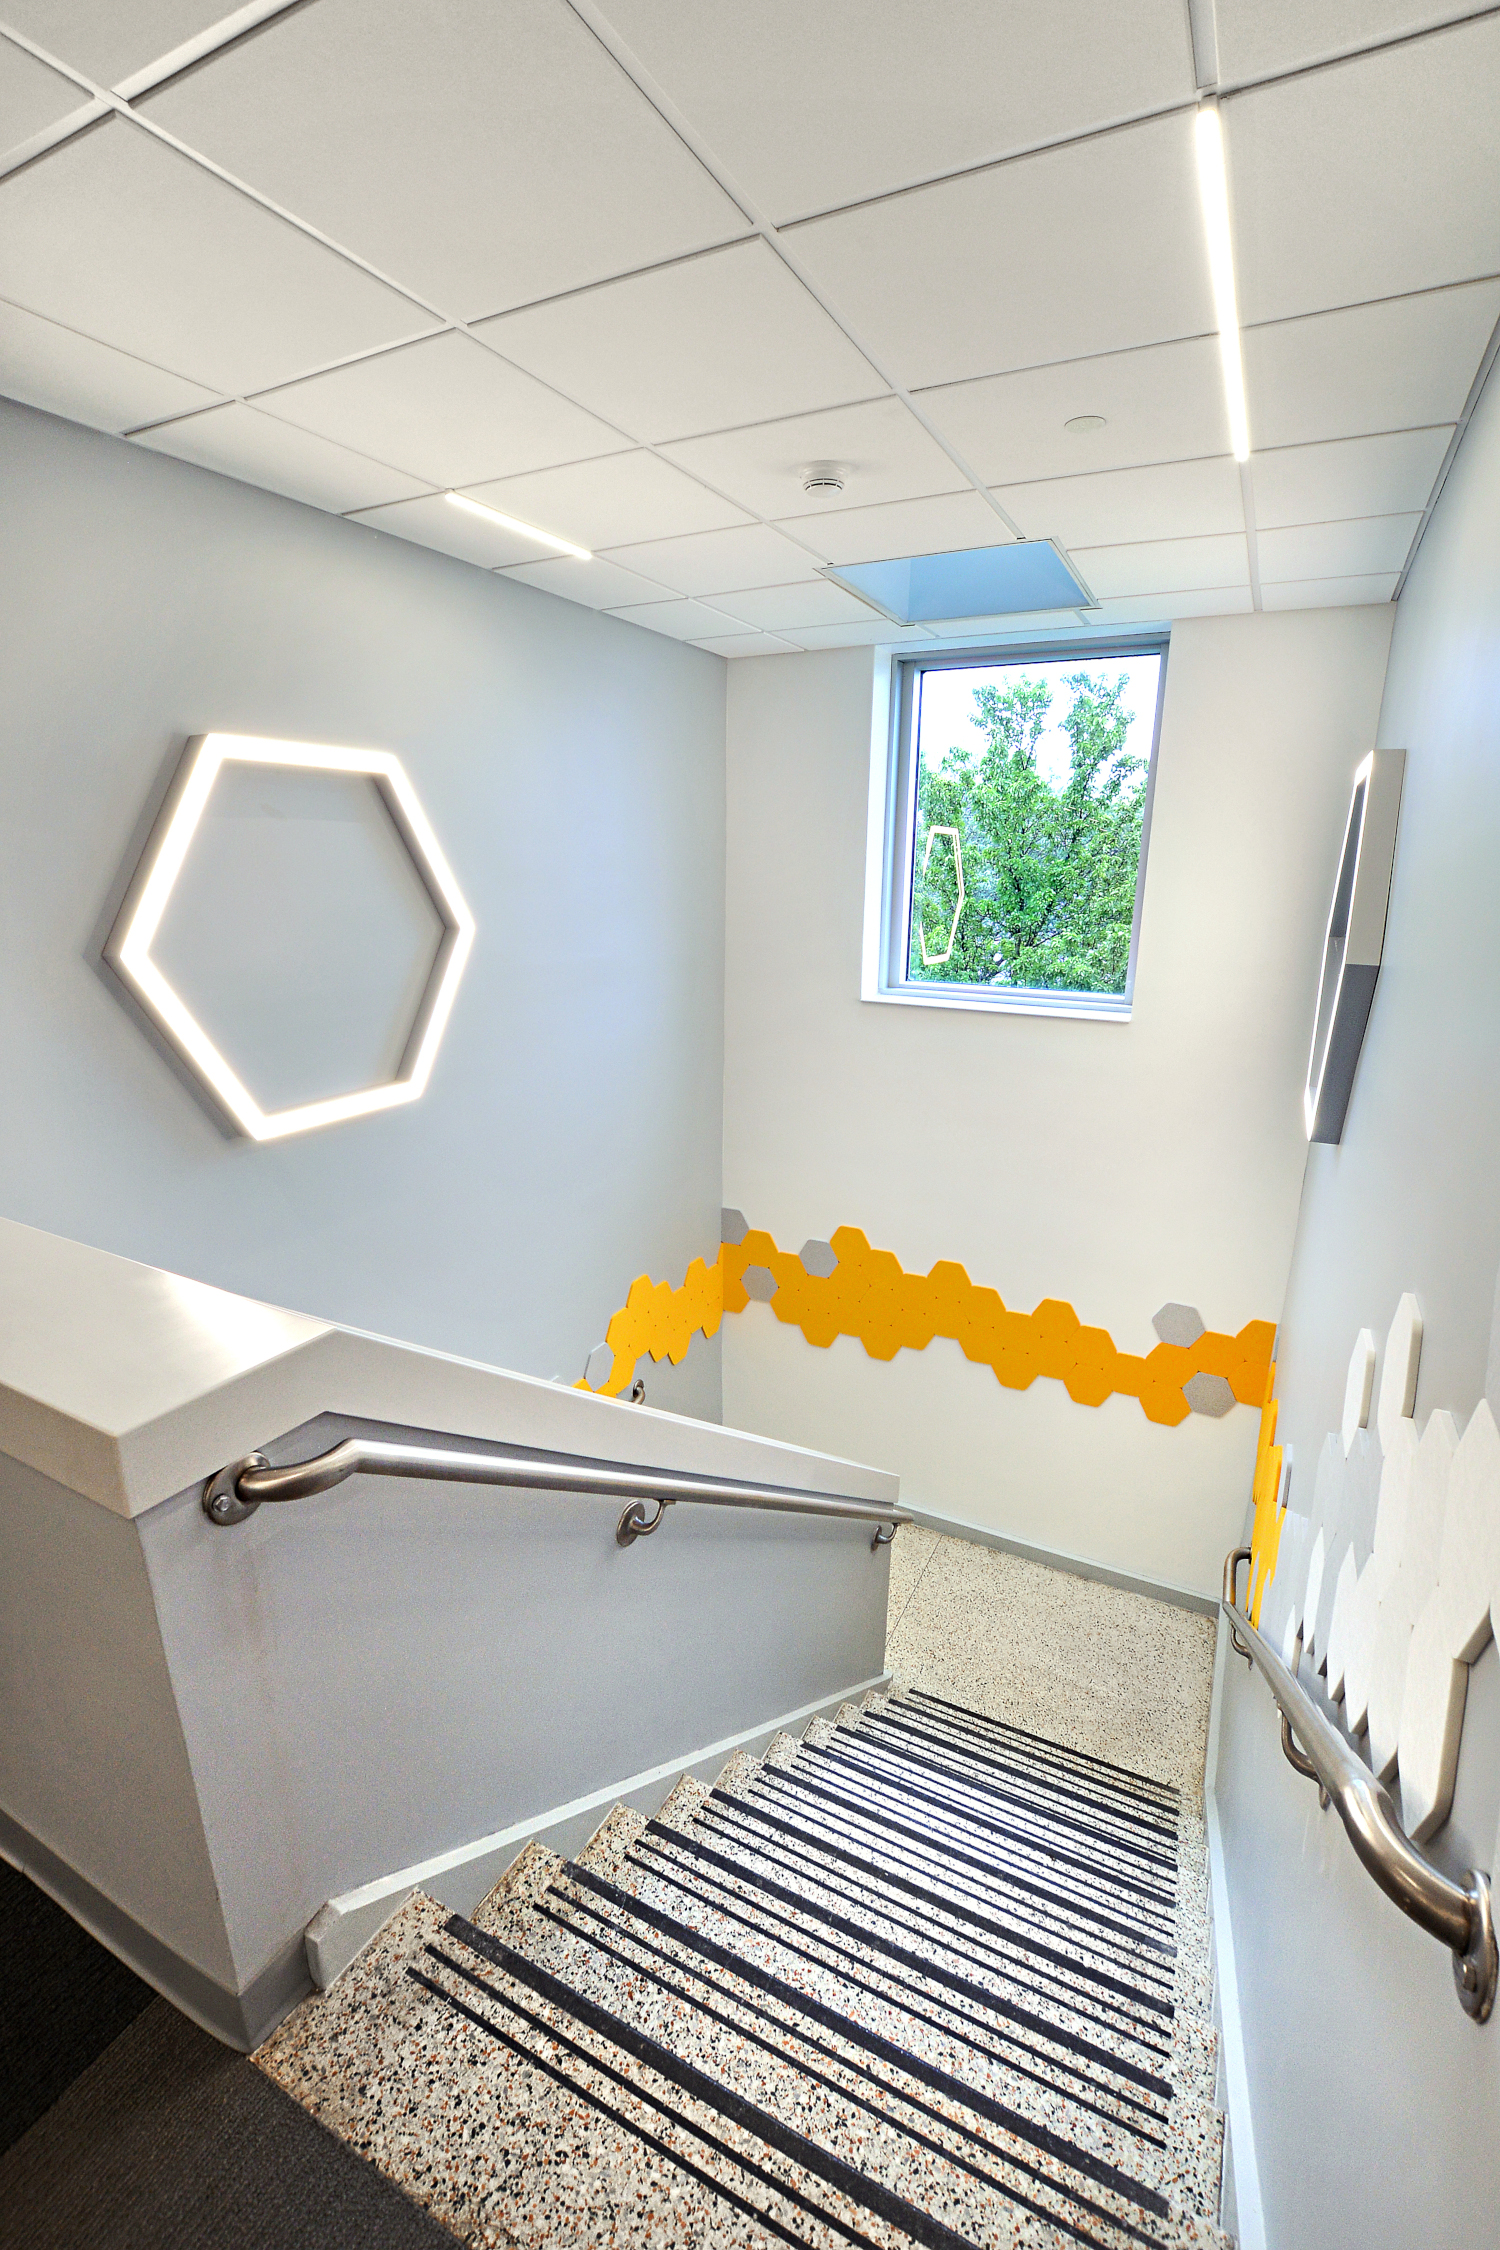 Stairway in new Learning Commons with artwork